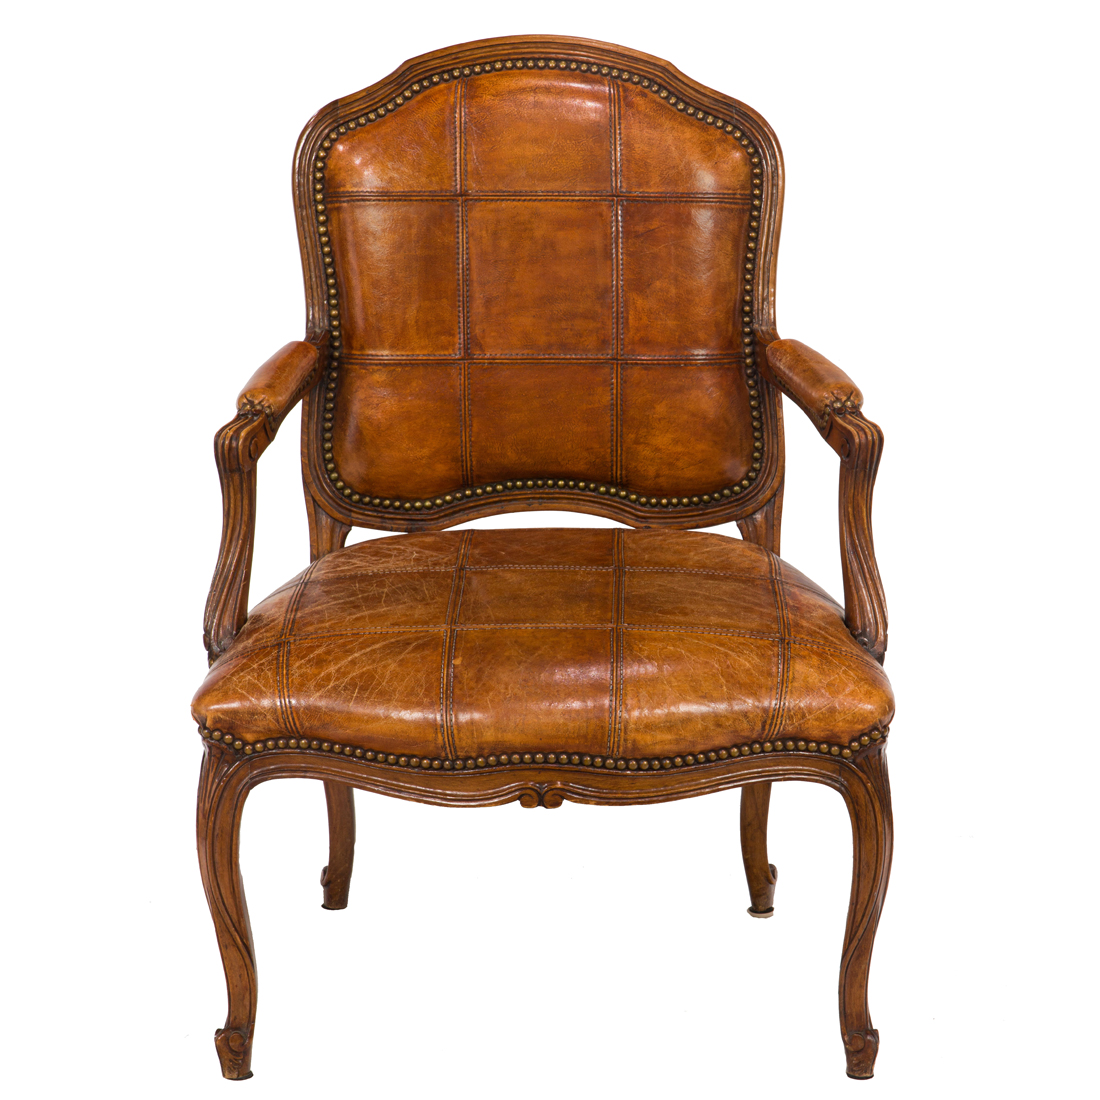 A FRENCH ROCOCO STYLE FAUTEUIL 3a16b4